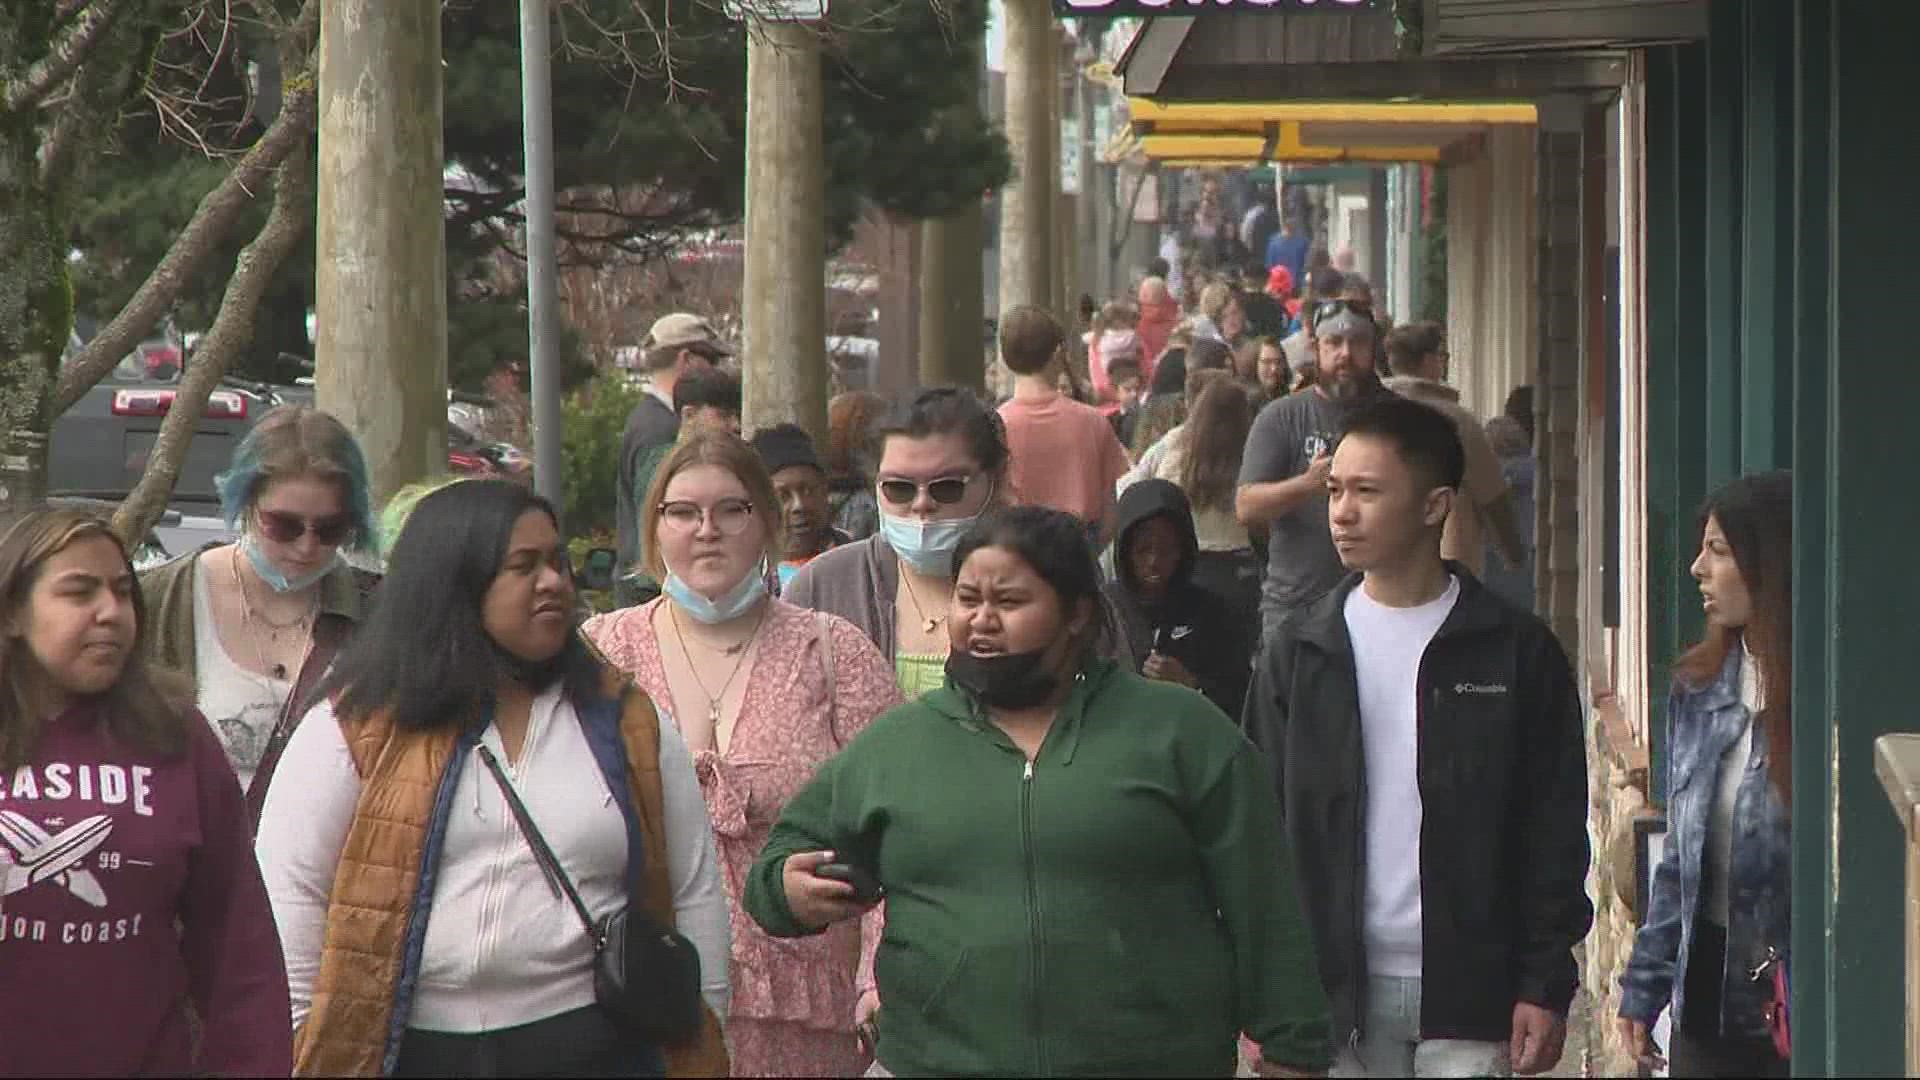 Spring break couldn't come at a better time for businesses along the Oregon Coast. And with mask mandates lifted, it seems more people are traveling.